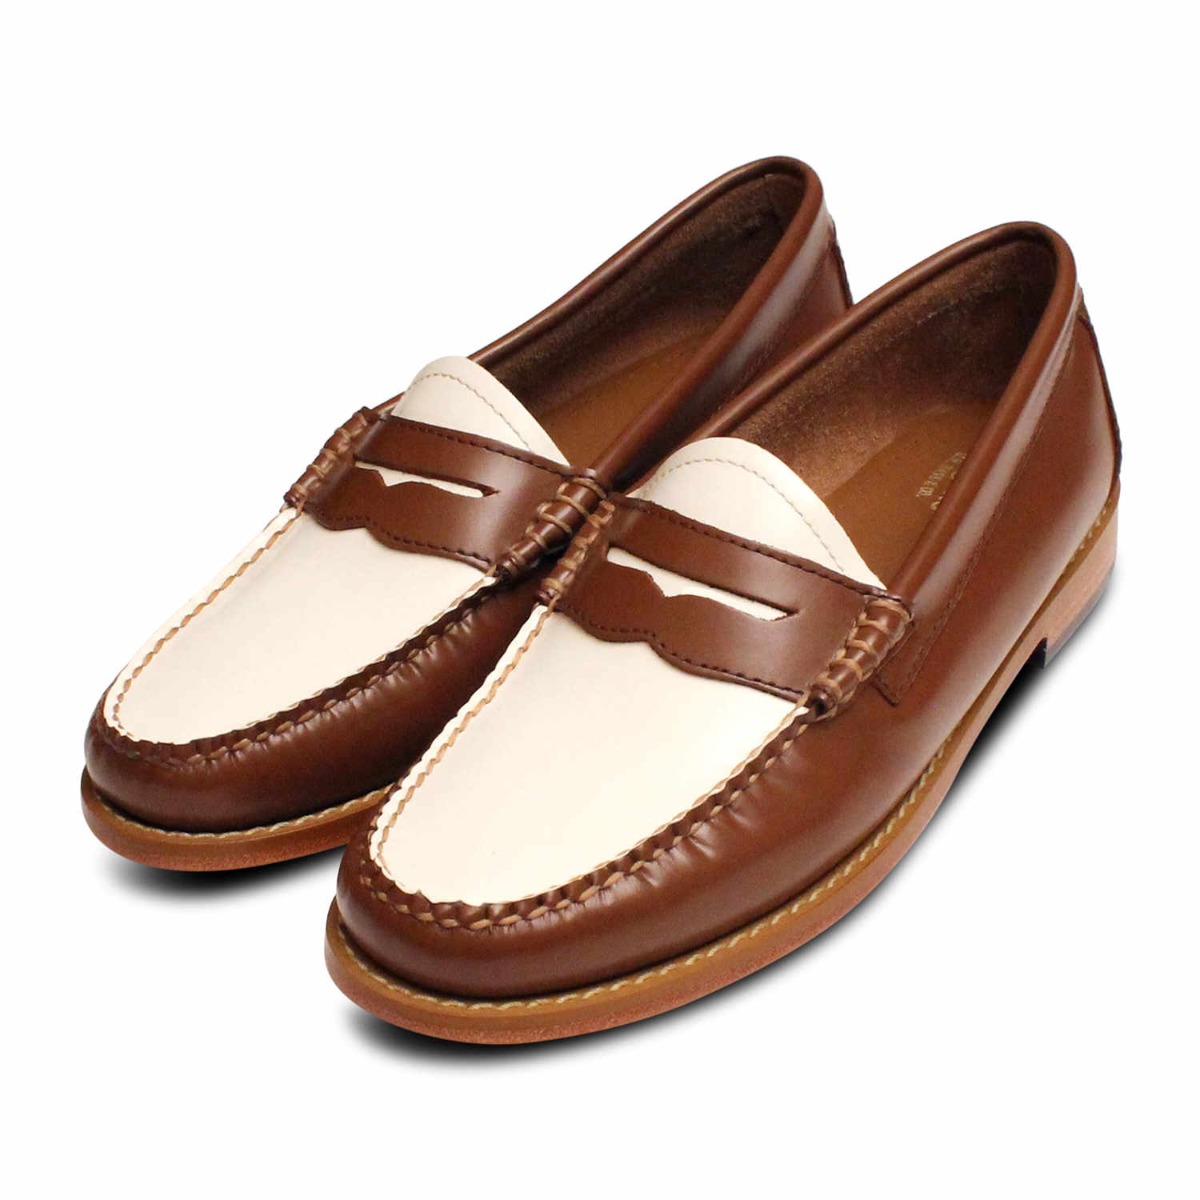 Ordliste aspekt mave Bass Weejuns Limited Edition Brown & White Penny Loafers | eBay